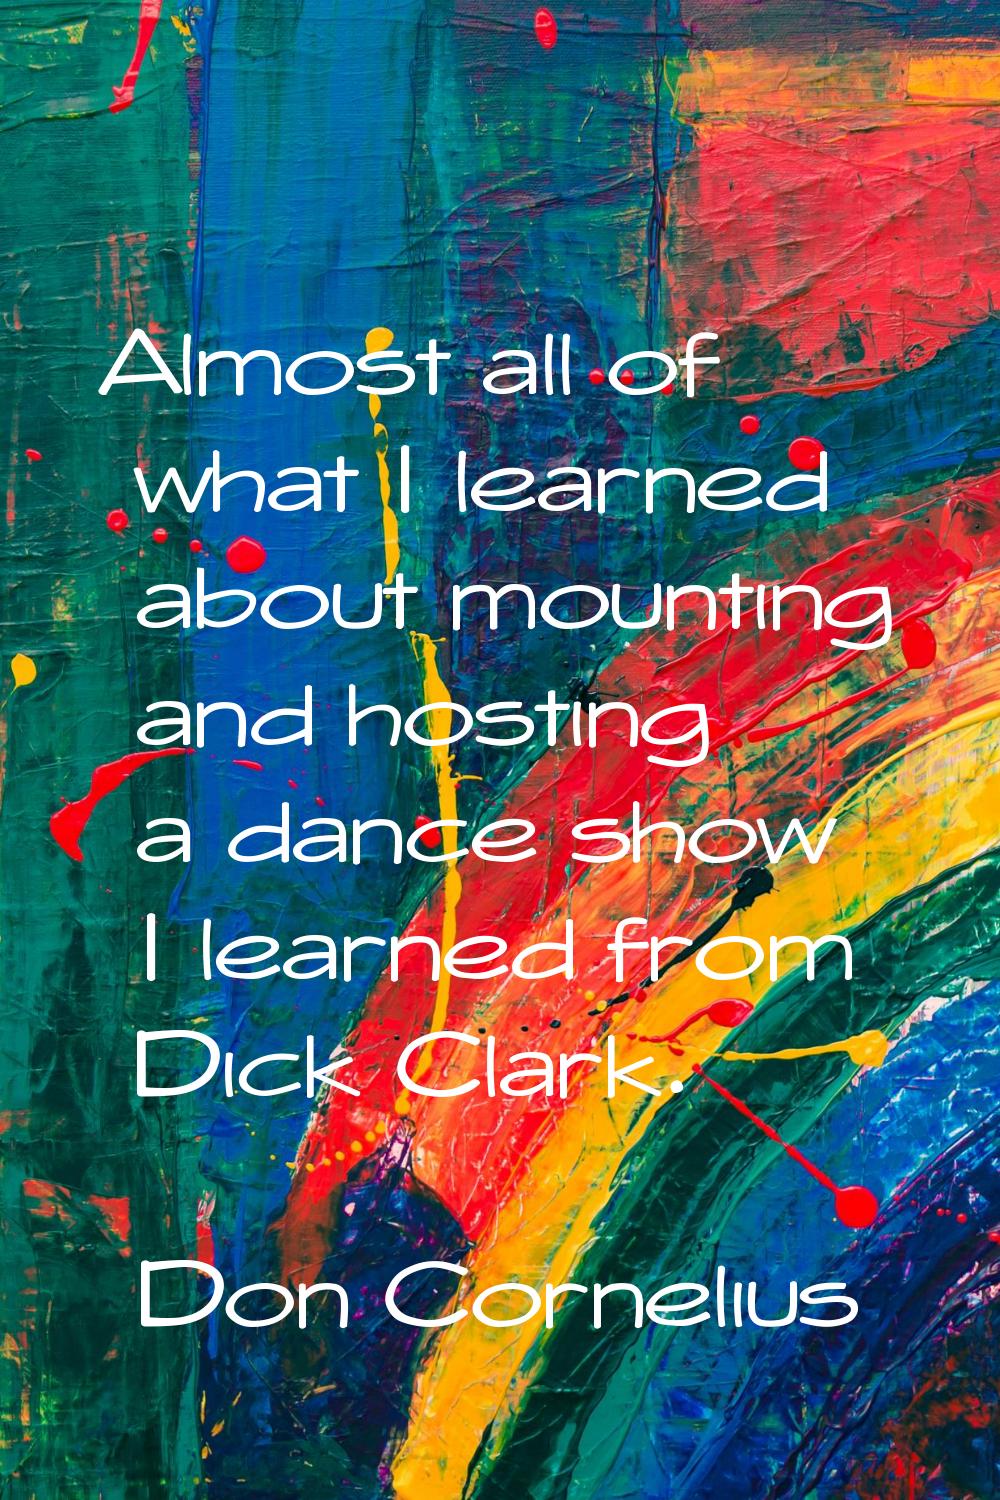 Almost all of what I learned about mounting and hosting a dance show I learned from Dick Clark.